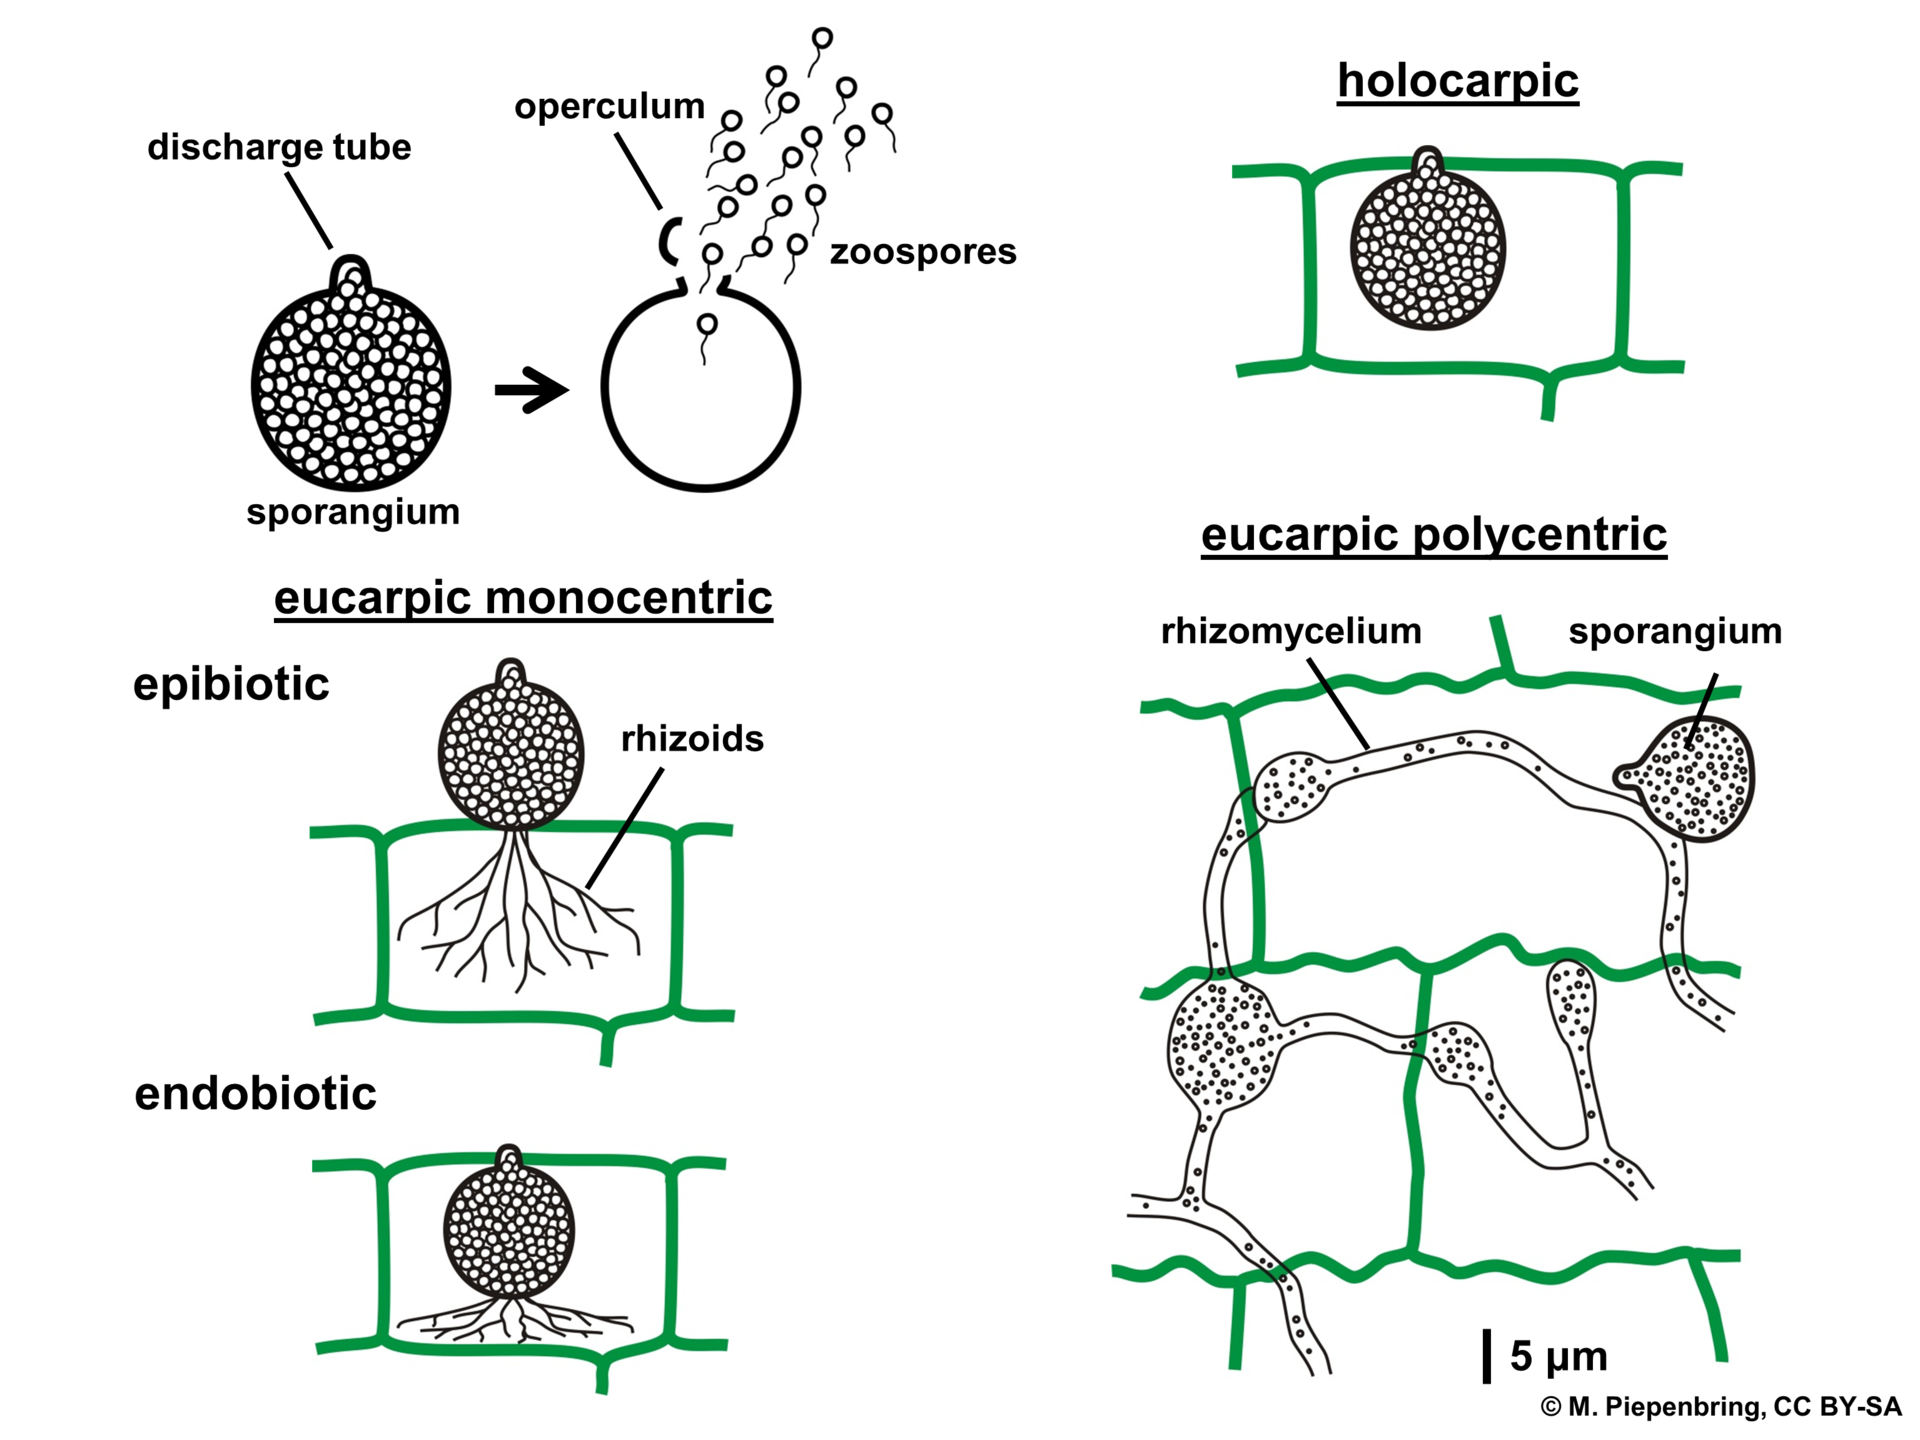 Examples of chytrid cell formations: holocarpic, epibiotic, endobiotic, and eucarpic polycentric.